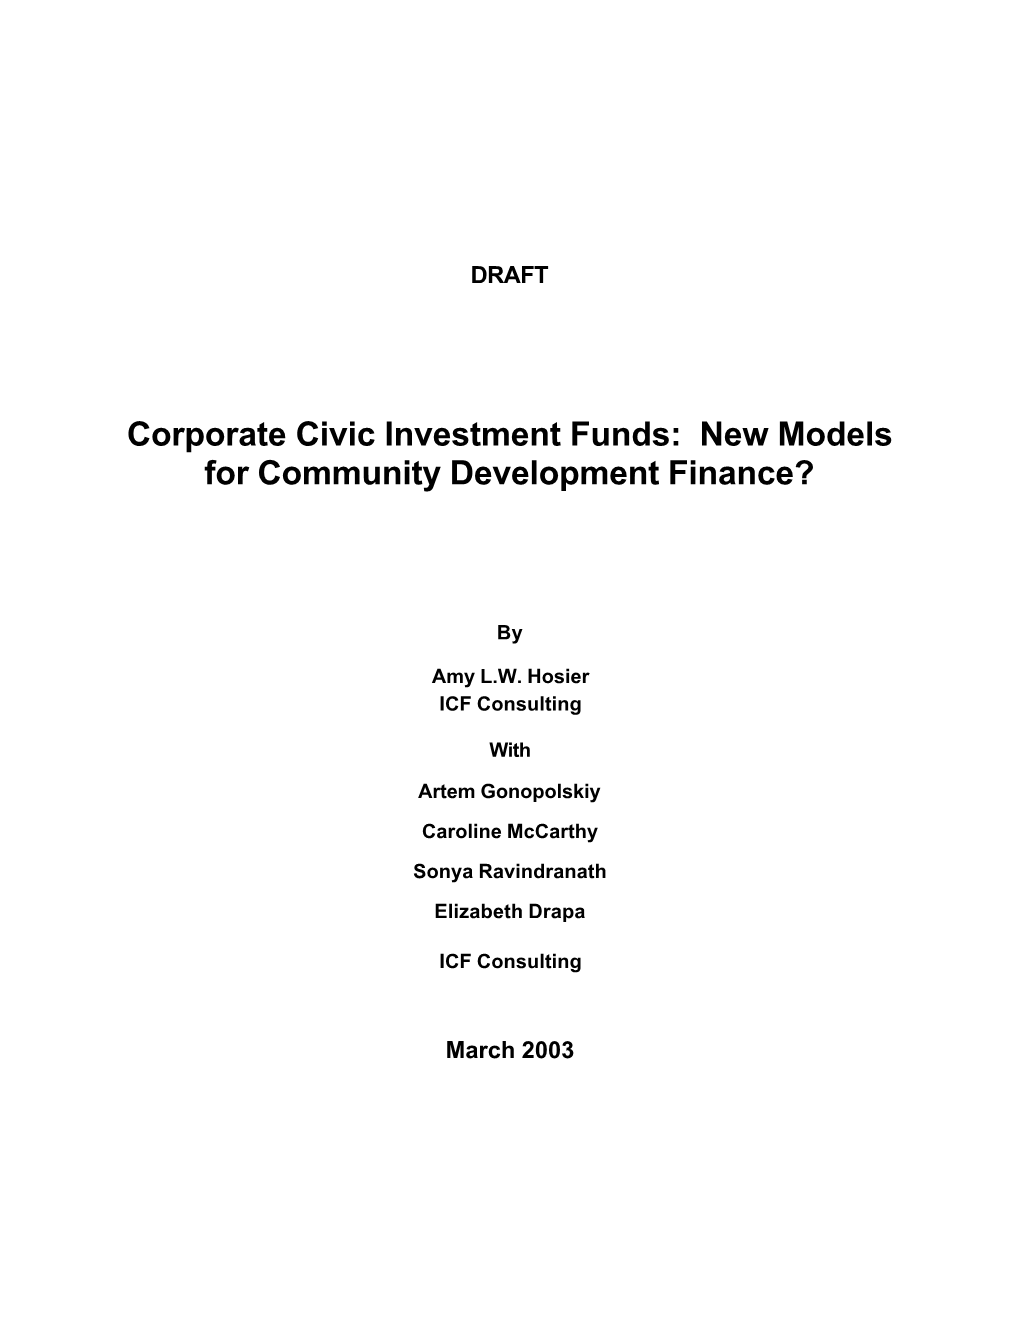 Corporate Civic Investment Funds: New Models for Community Development Finance?